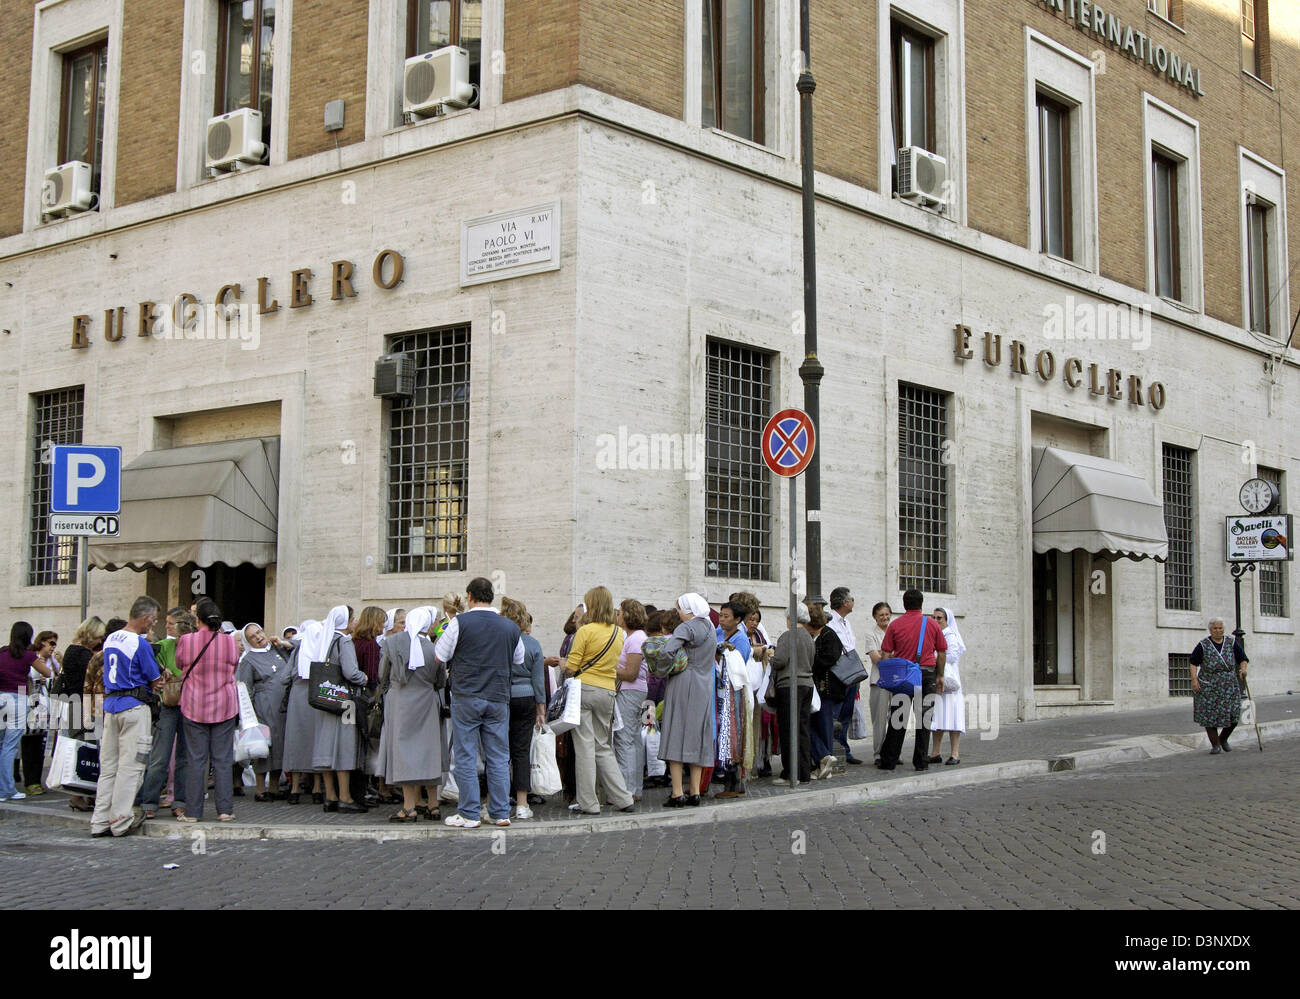 The picture shows the entrance area of Euroclero, a shop for clerical clothes, in which Pope Benedict XVI. is a customer in Rome, Italy, Thursday, 04 May 2006. Photo: Lars Halbauer Stock Photo